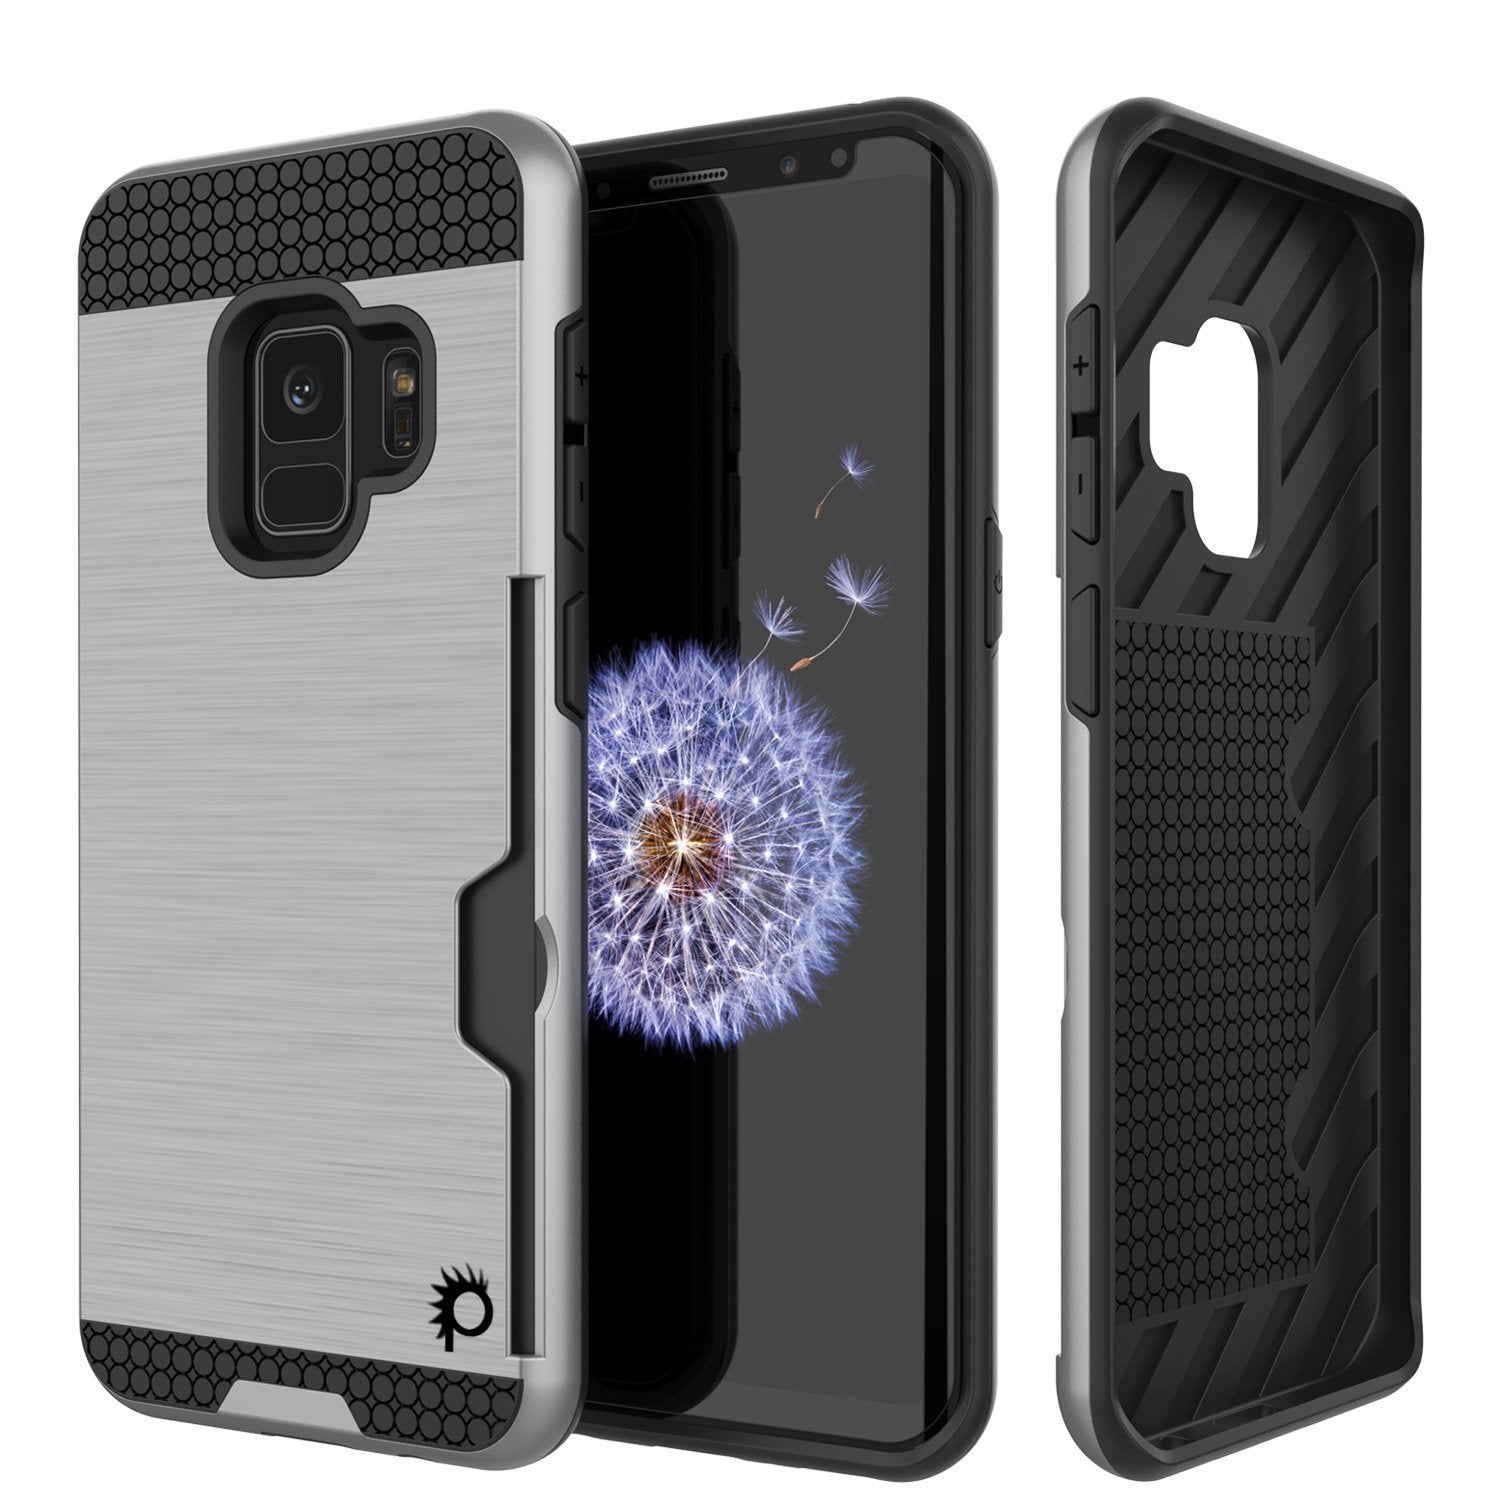 Galaxy S9 Case, PUNKcase [SLOT Series] [Slim Fit] Dual-Layer Armor Cover w/Integrated Anti-Shock System, Credit Card Slot [Silver] - PunkCase NZ